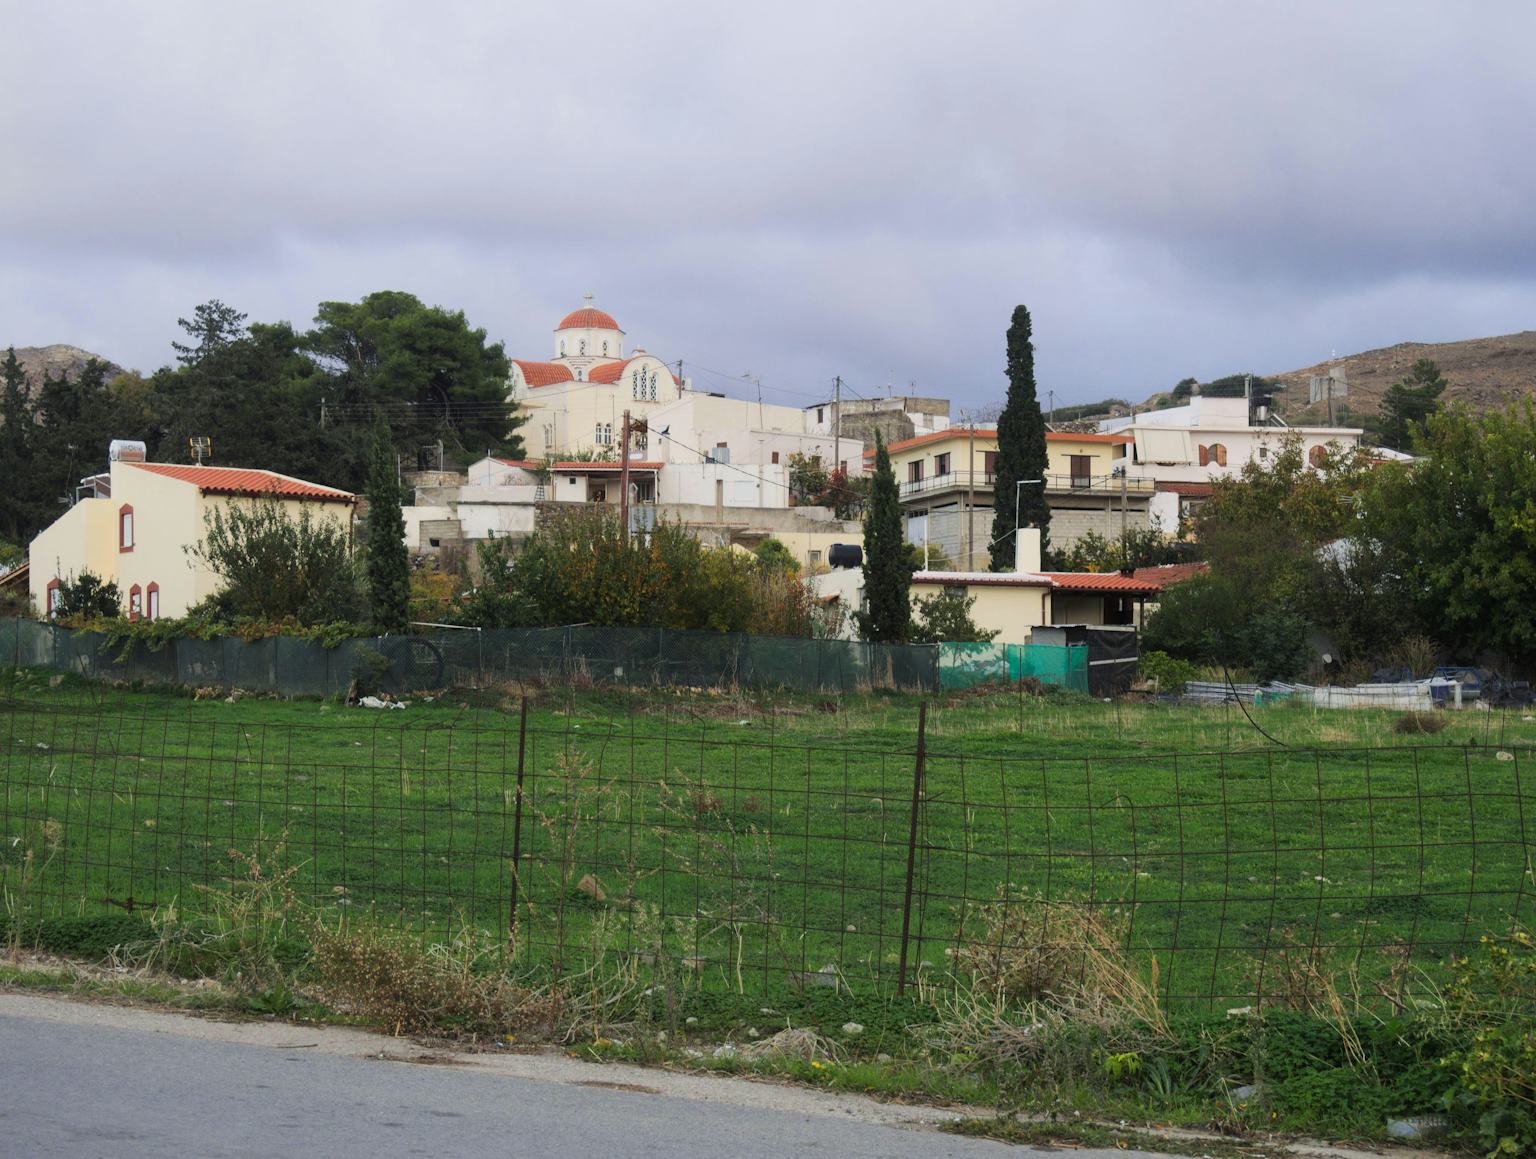 Sternes: A Village of Warm Hospitality and Hidden Charms